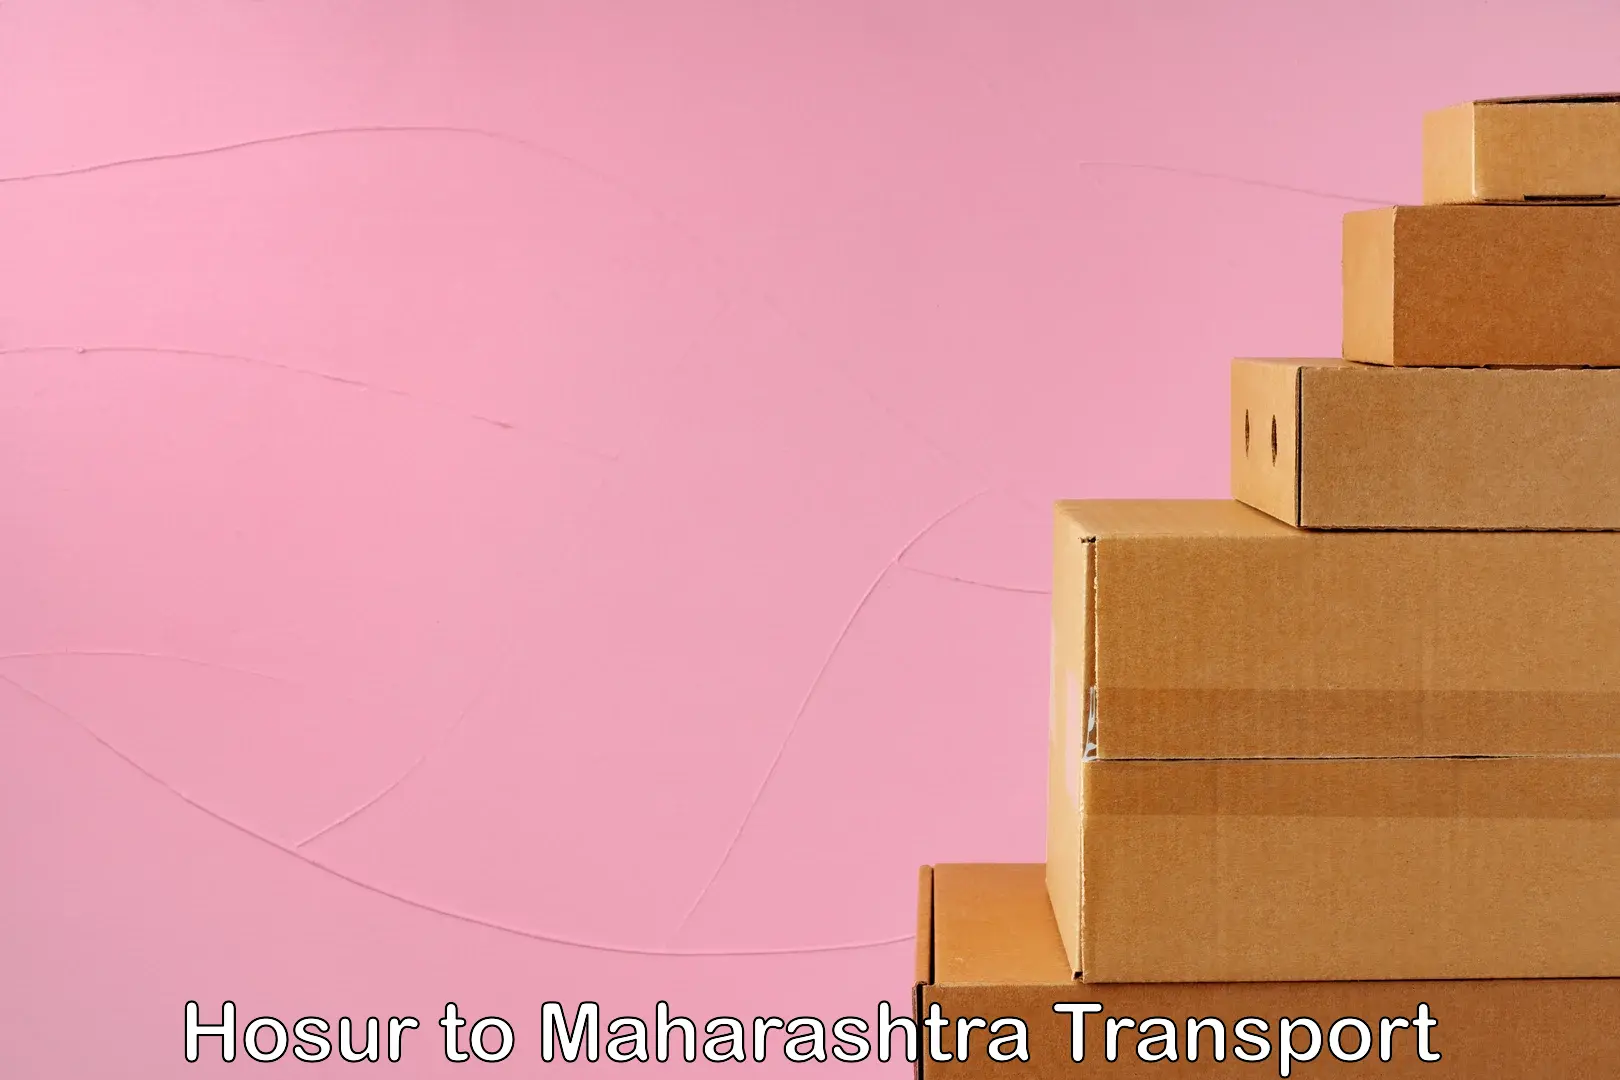 Air cargo transport services in Hosur to Maharashtra